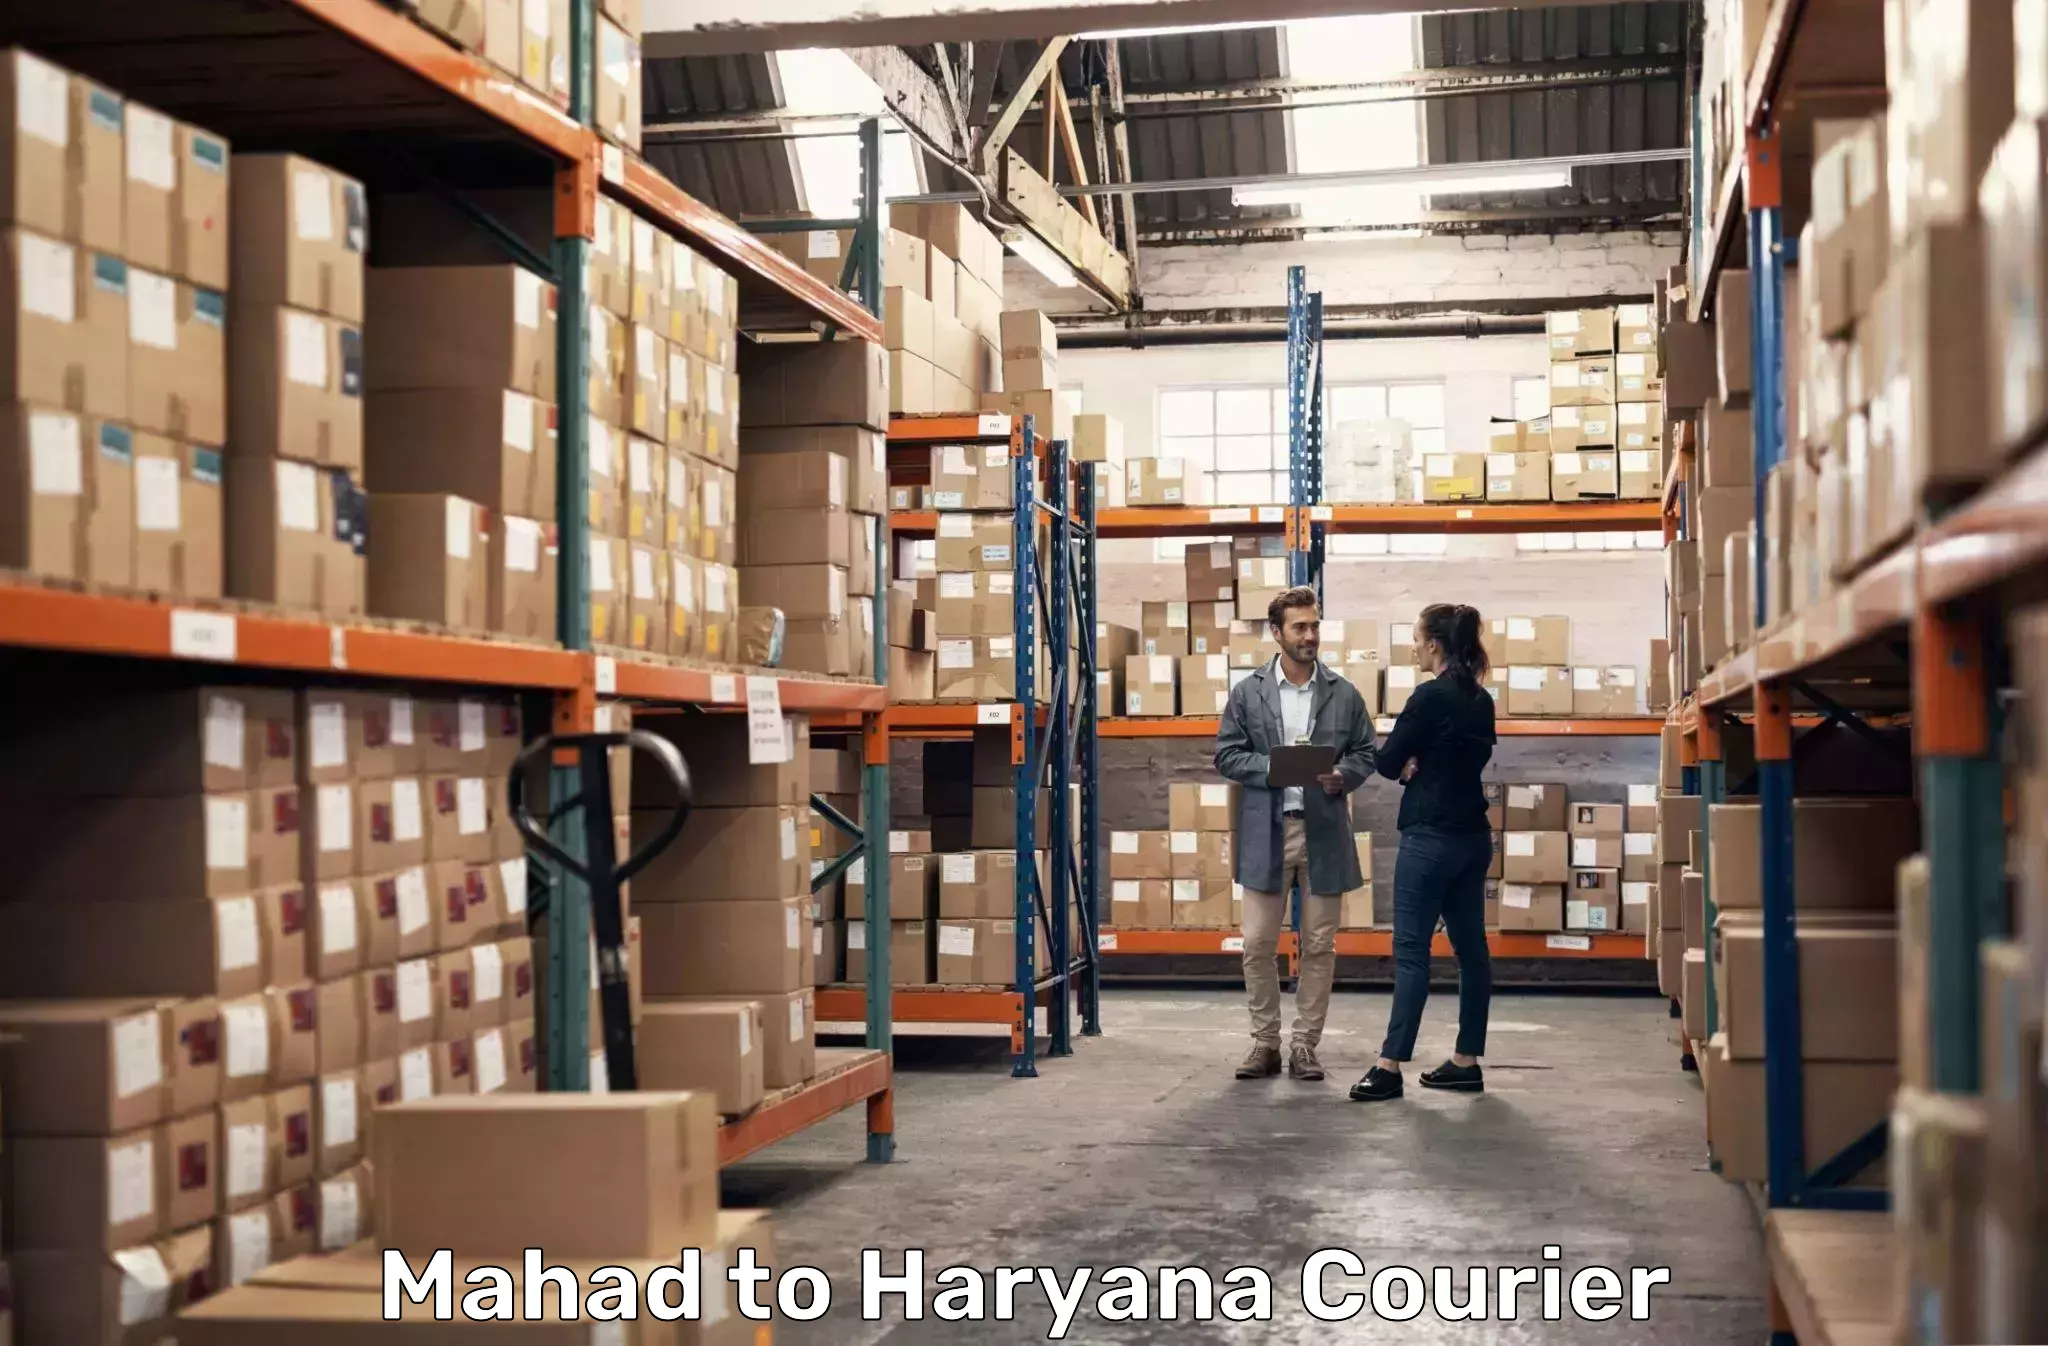 Premium delivery services in Mahad to Panchkula